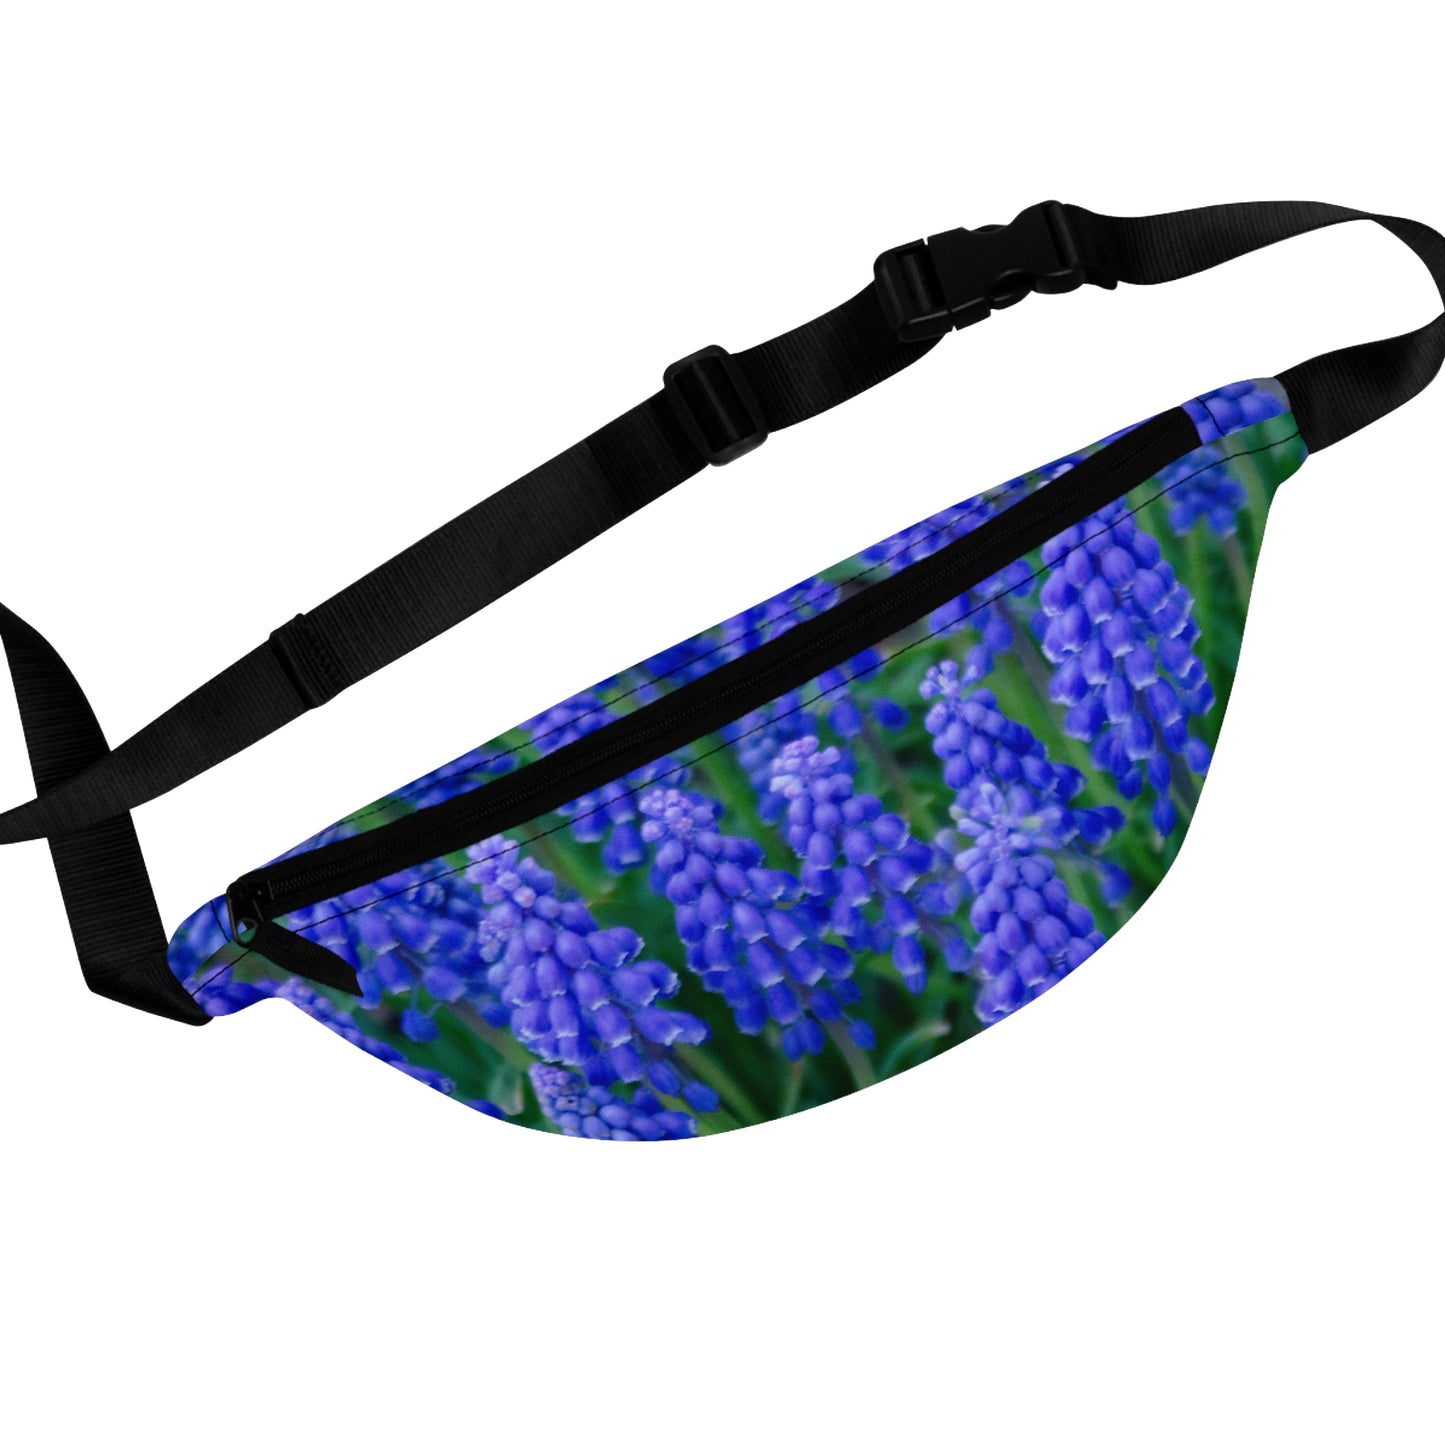 Flowers 10 Fanny Pack